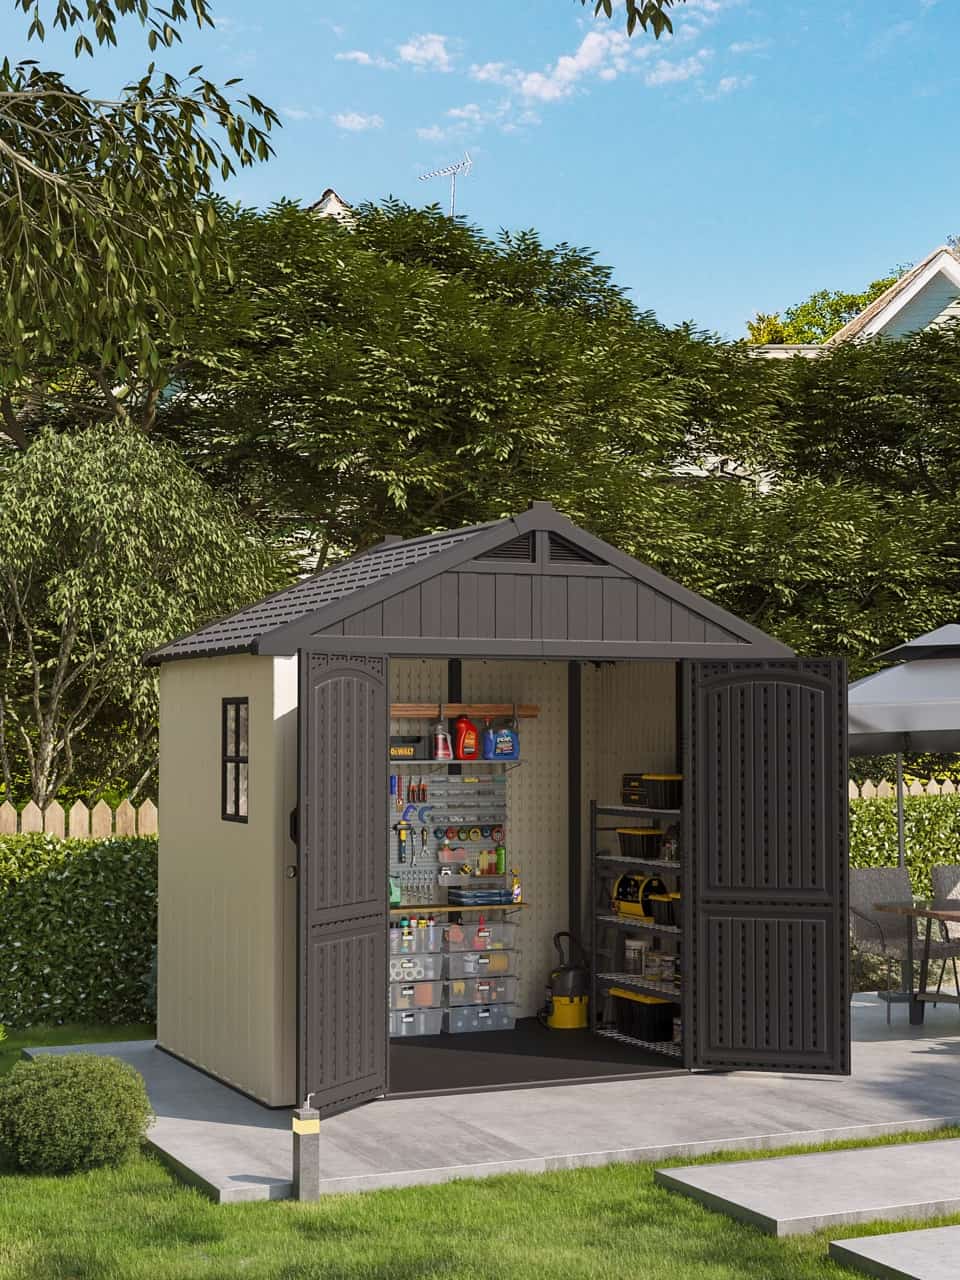 kick-it 8x6 plastic storage shed fulfill with garden tool standing in backyard